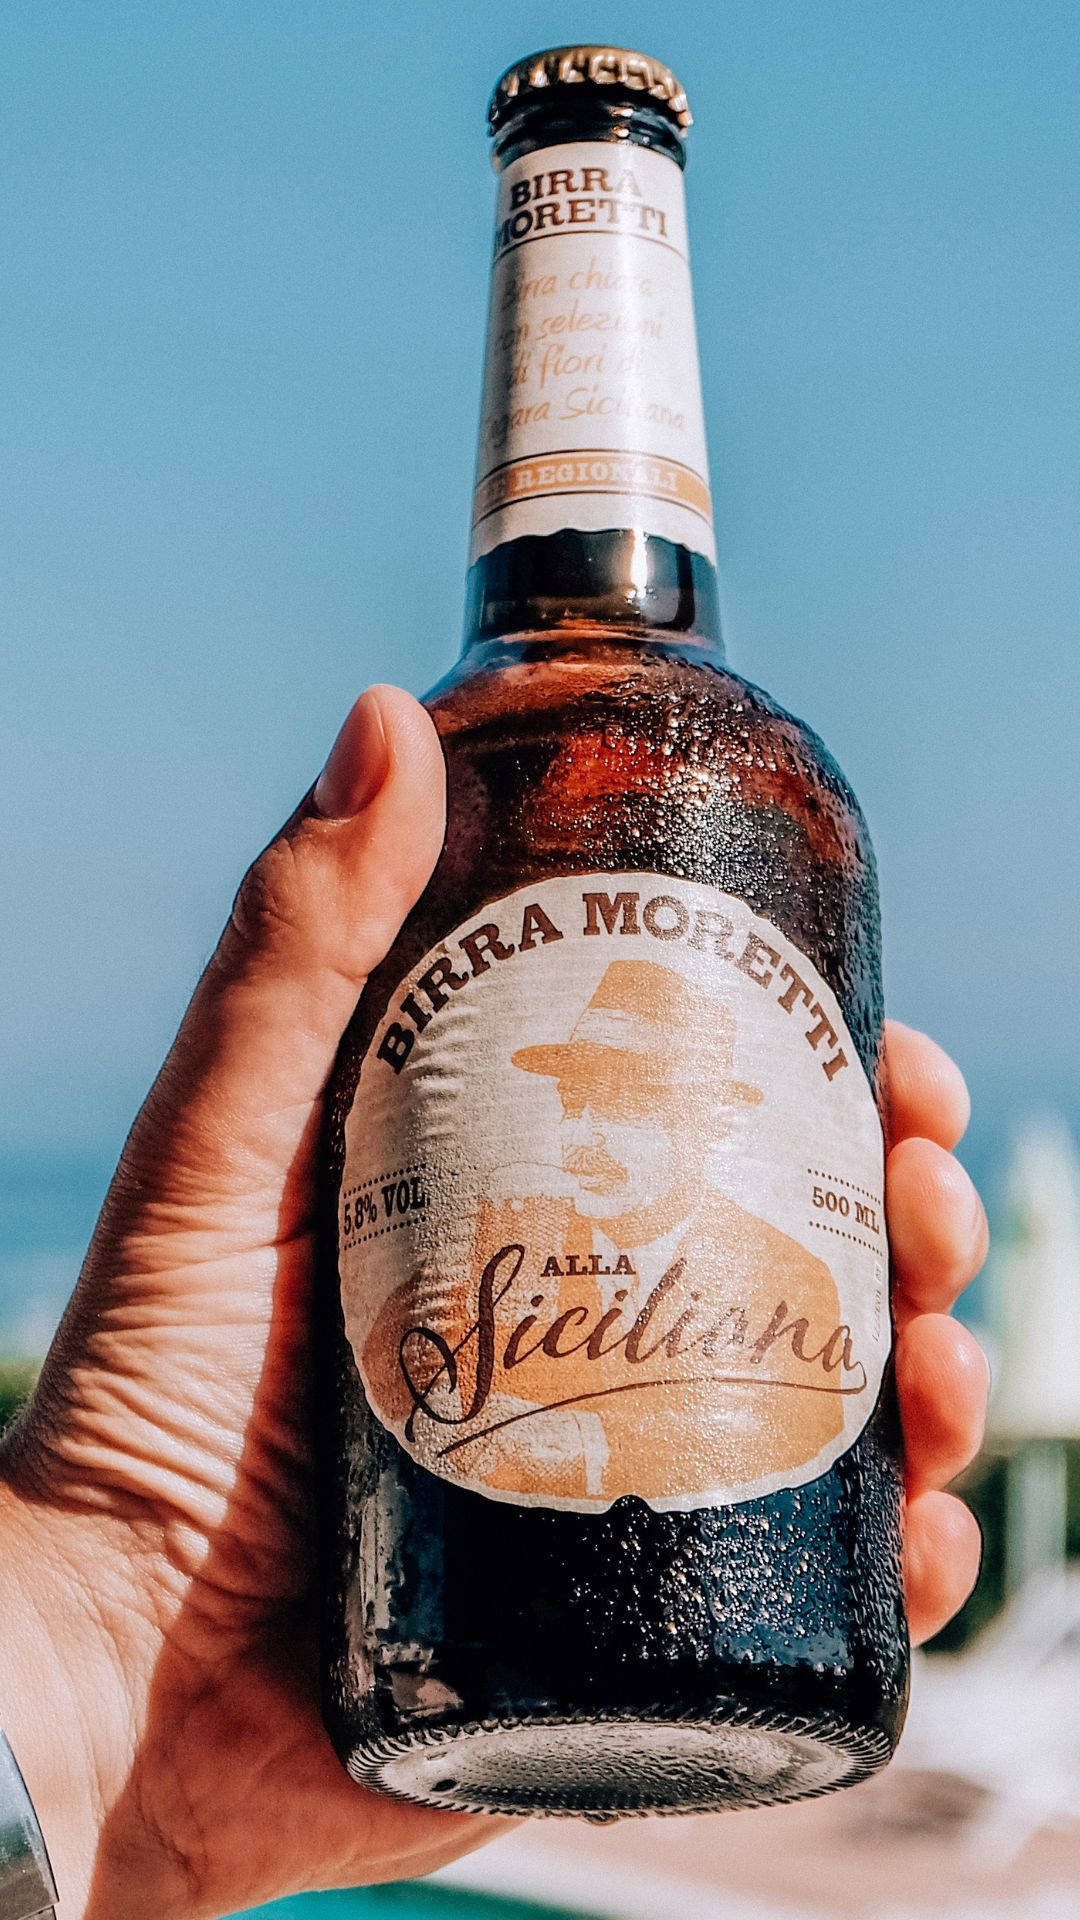 Wet Bira Moretti Alcohol Beer Picture